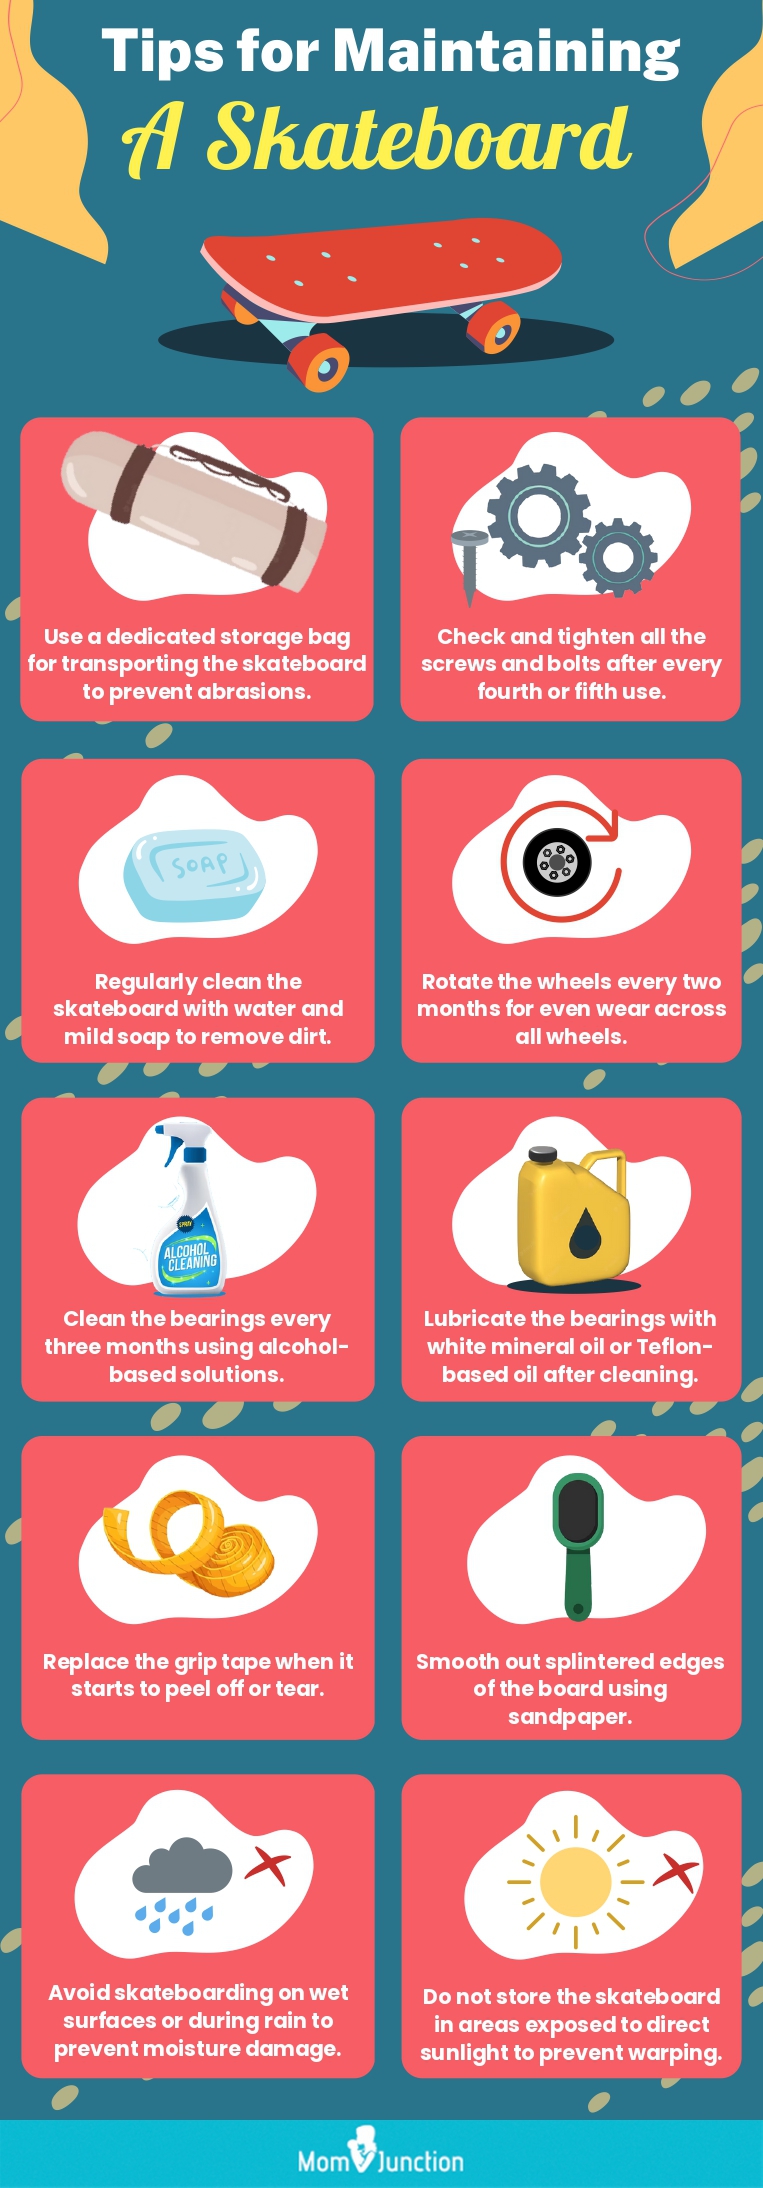 Tips For Maintaining A Skateboard (infographic)